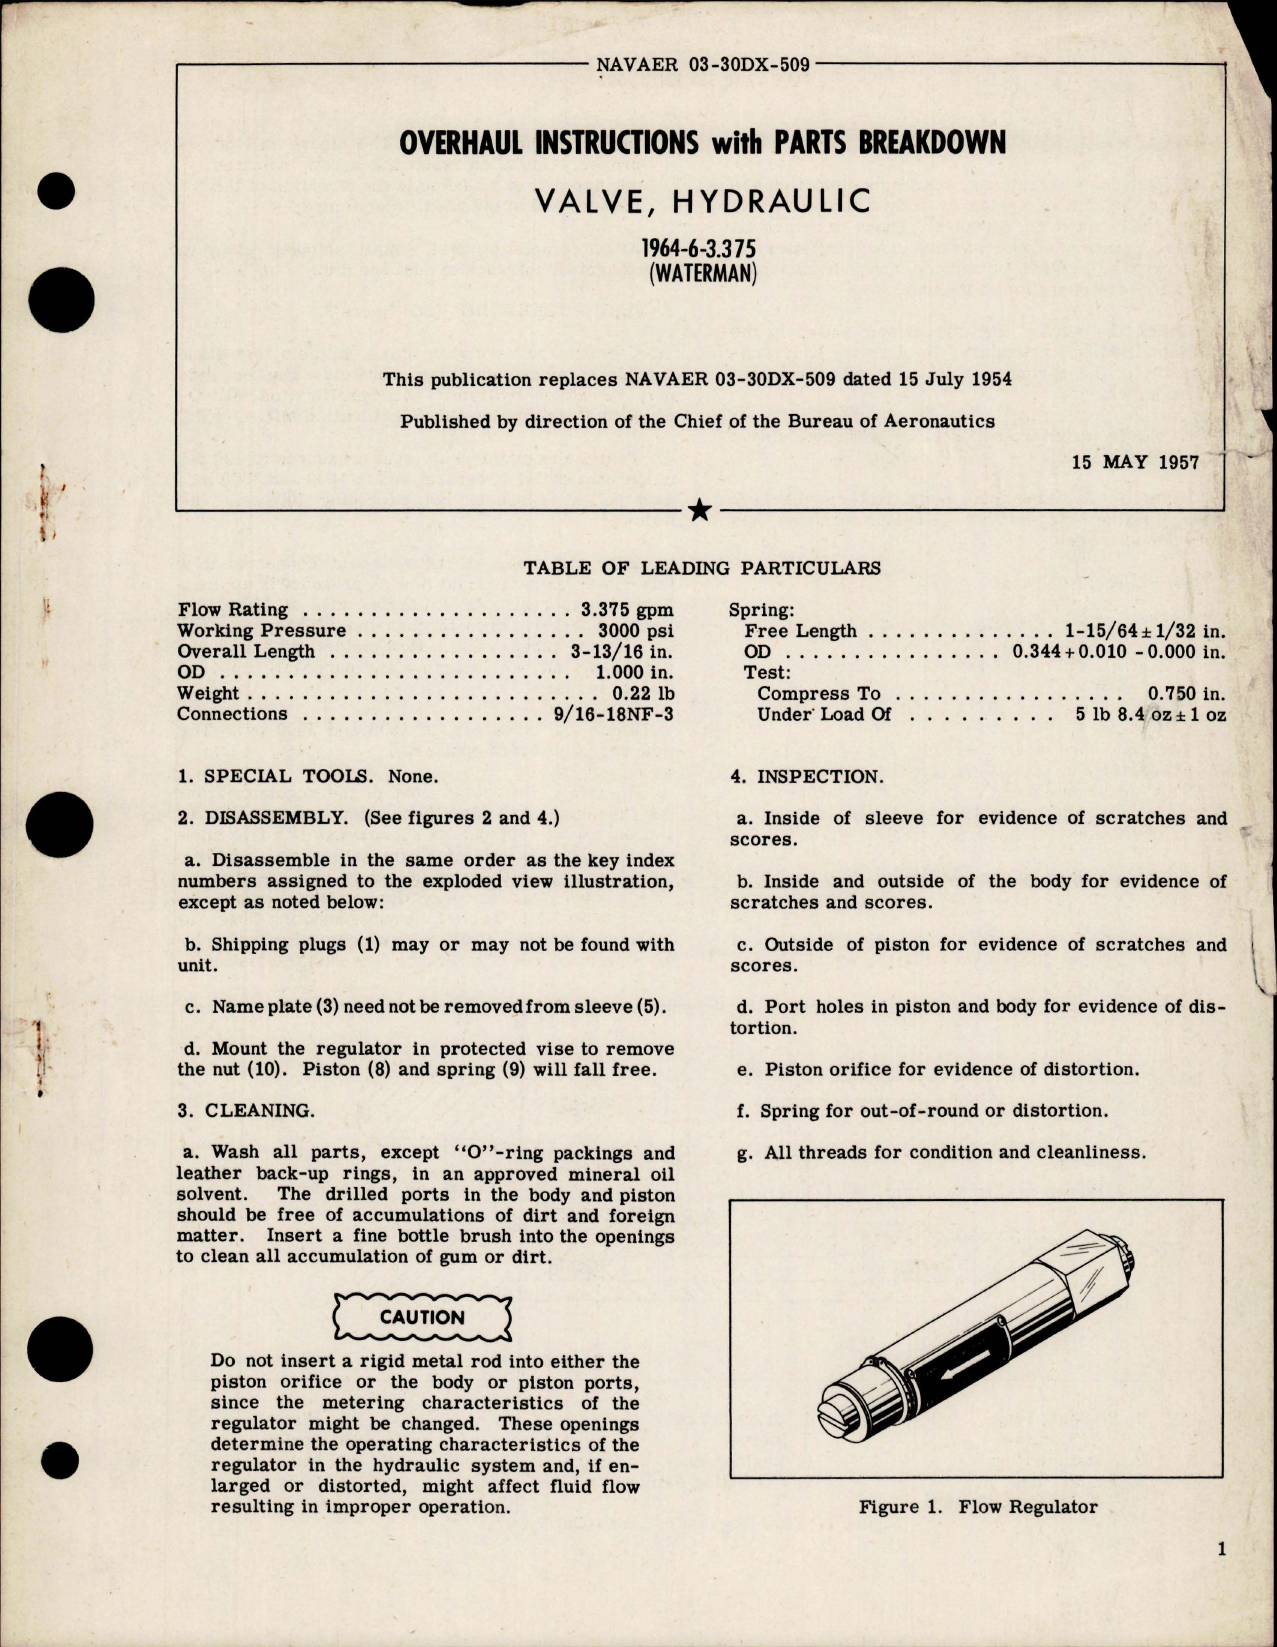 Sample page 1 from AirCorps Library document: Overhaul Instructions with Parts Breakdown for Hydraulic Valve - 1964-6-3.375 